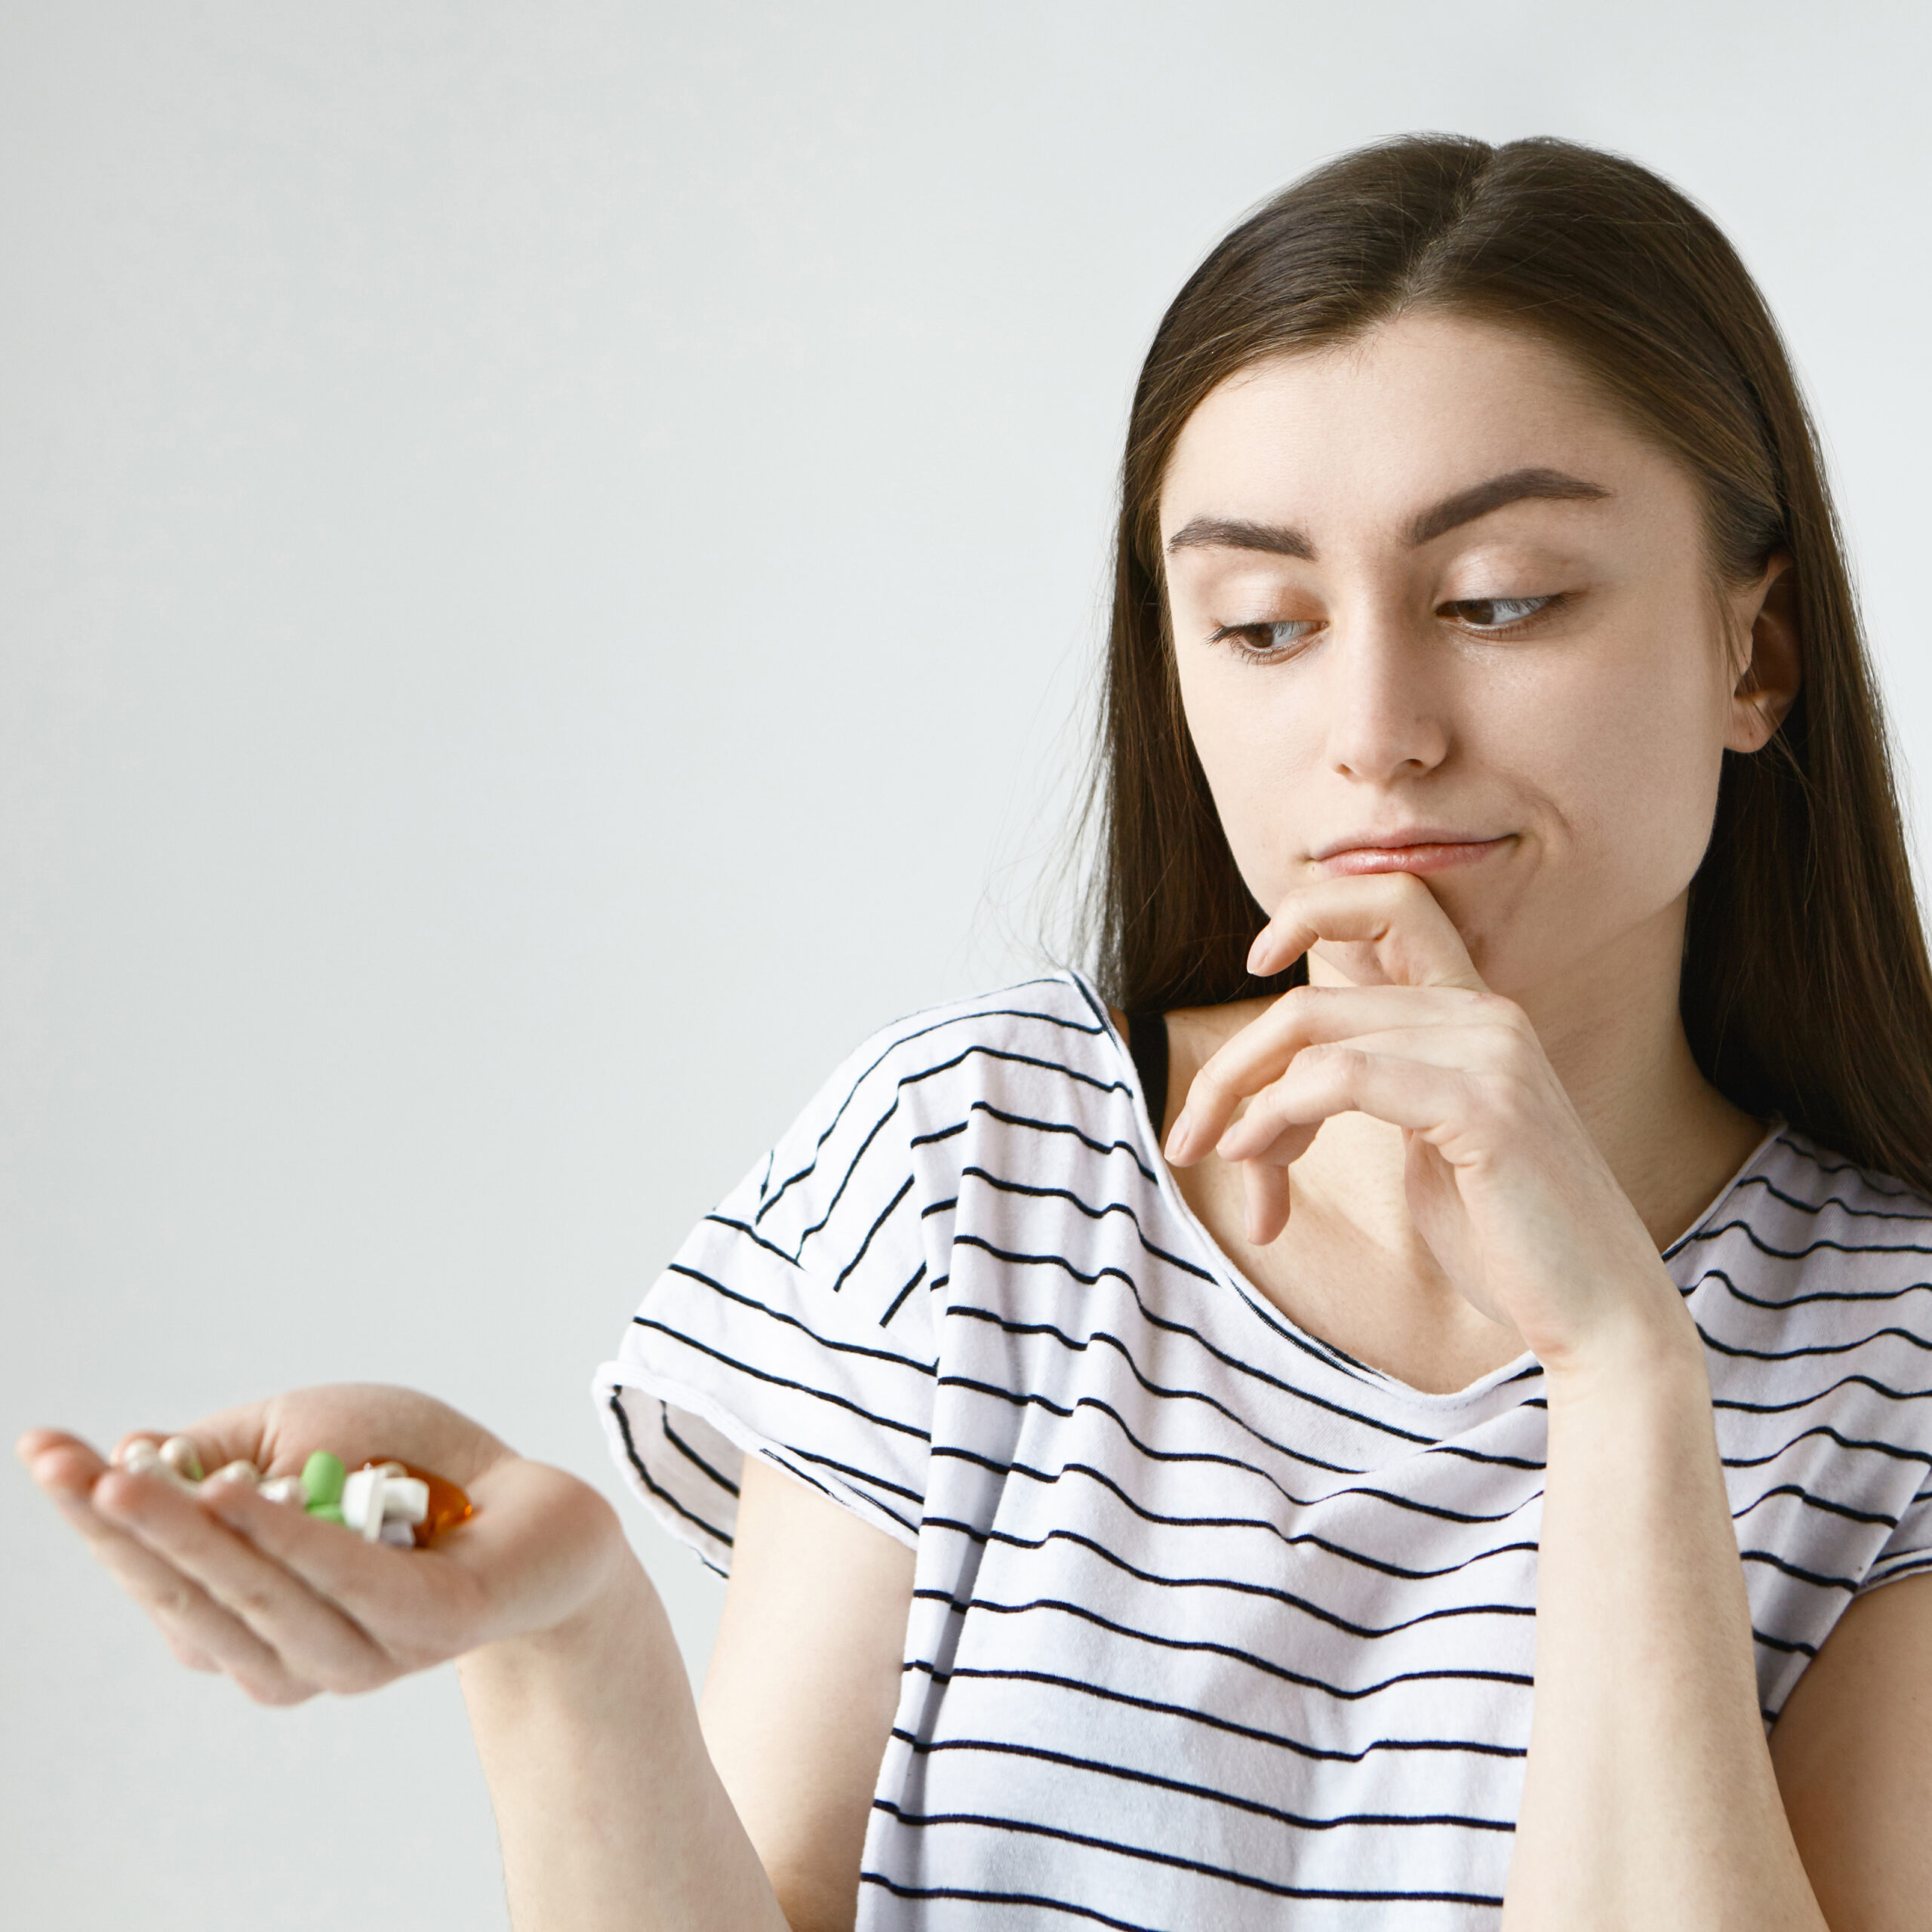 Health, care and treatment concept. Isolated studio shot of indecisive doubtful young lady with loose dark hair rubbing chin thoughtfully and looking at colorful pills on her palm, going to take them